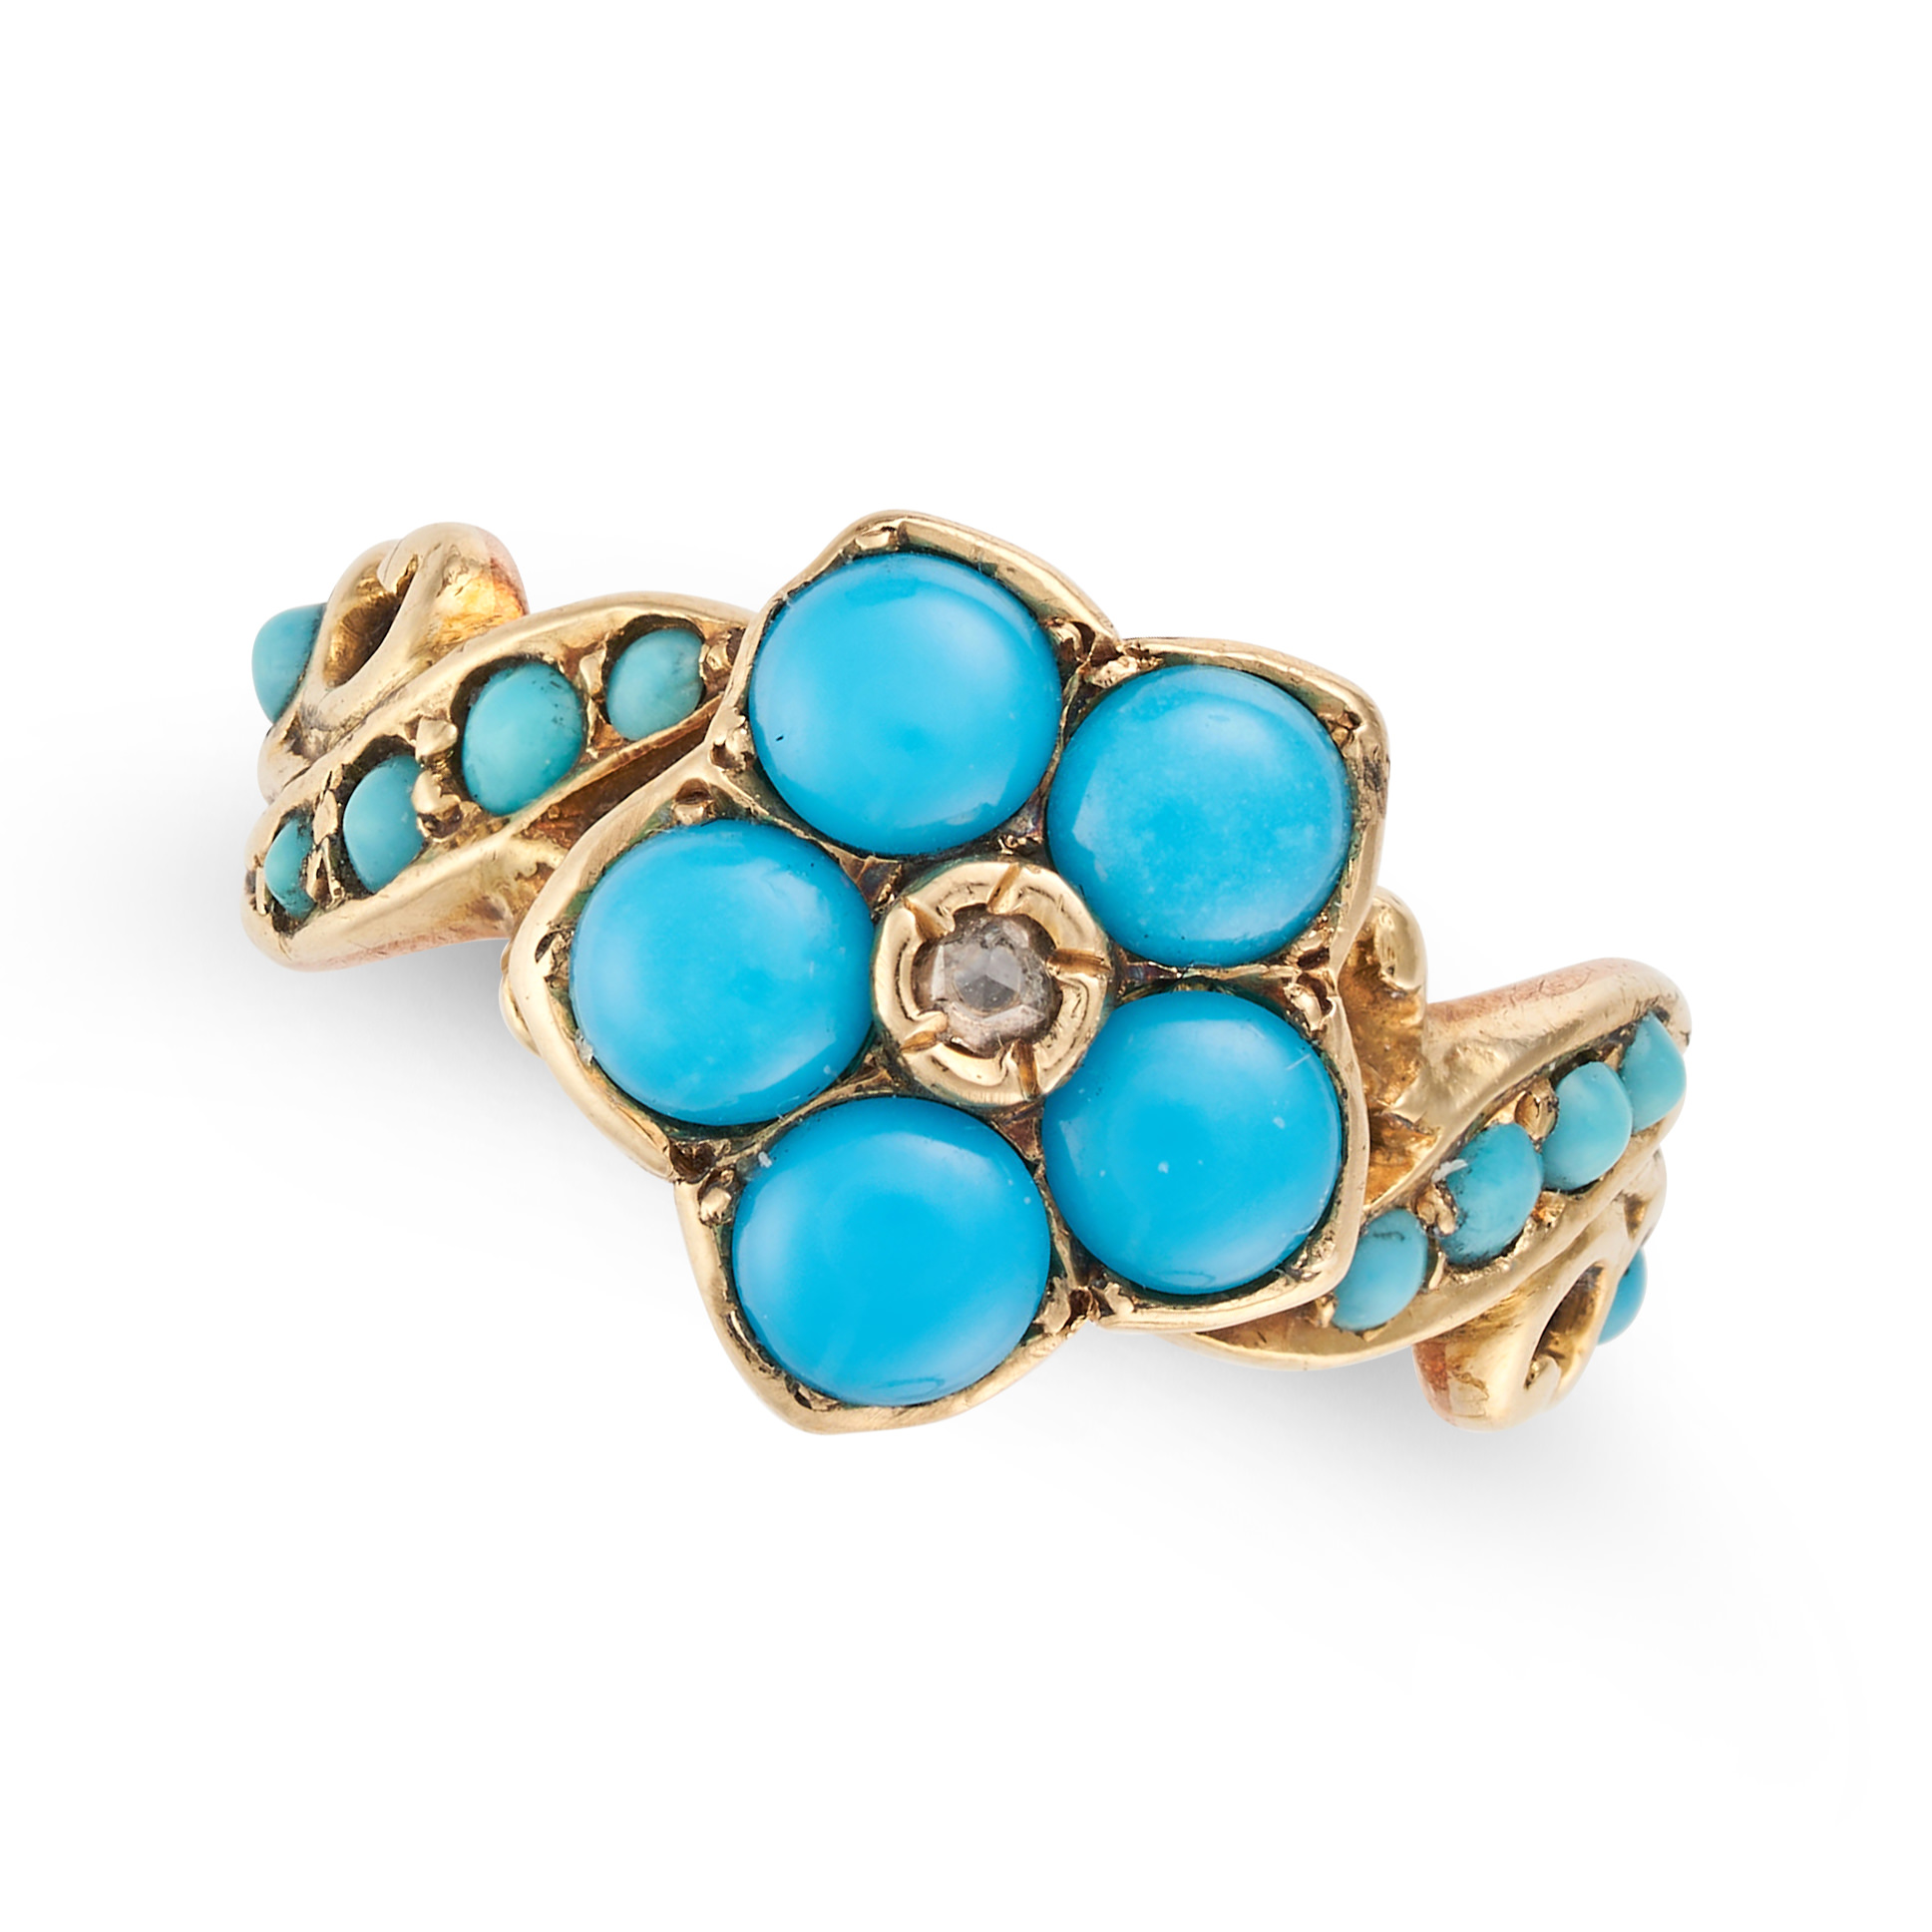 A TURQUOISE AND DIAMOND FLOWER RING set with a rose cut diamond in a cluster of round cabochon tu...